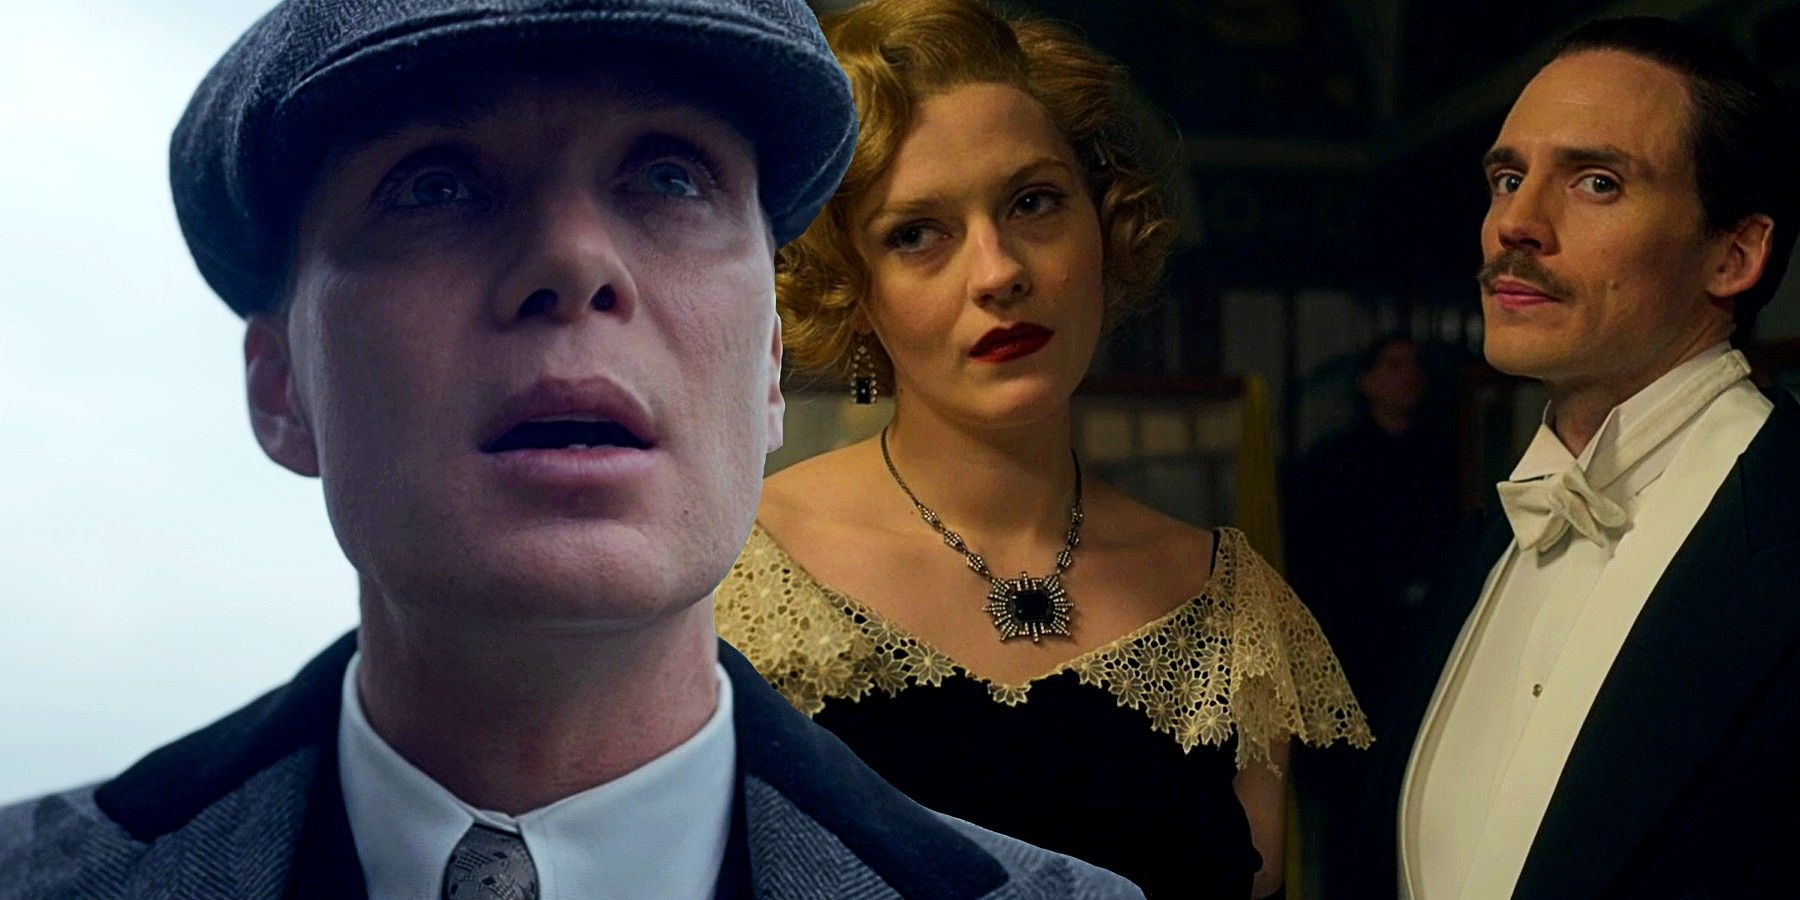 Cillian Murphy as Tommy Shelby, Amber Anderson as Diana Mitford and Sam Claflin as Oswald Mosley in Peaky Blinders